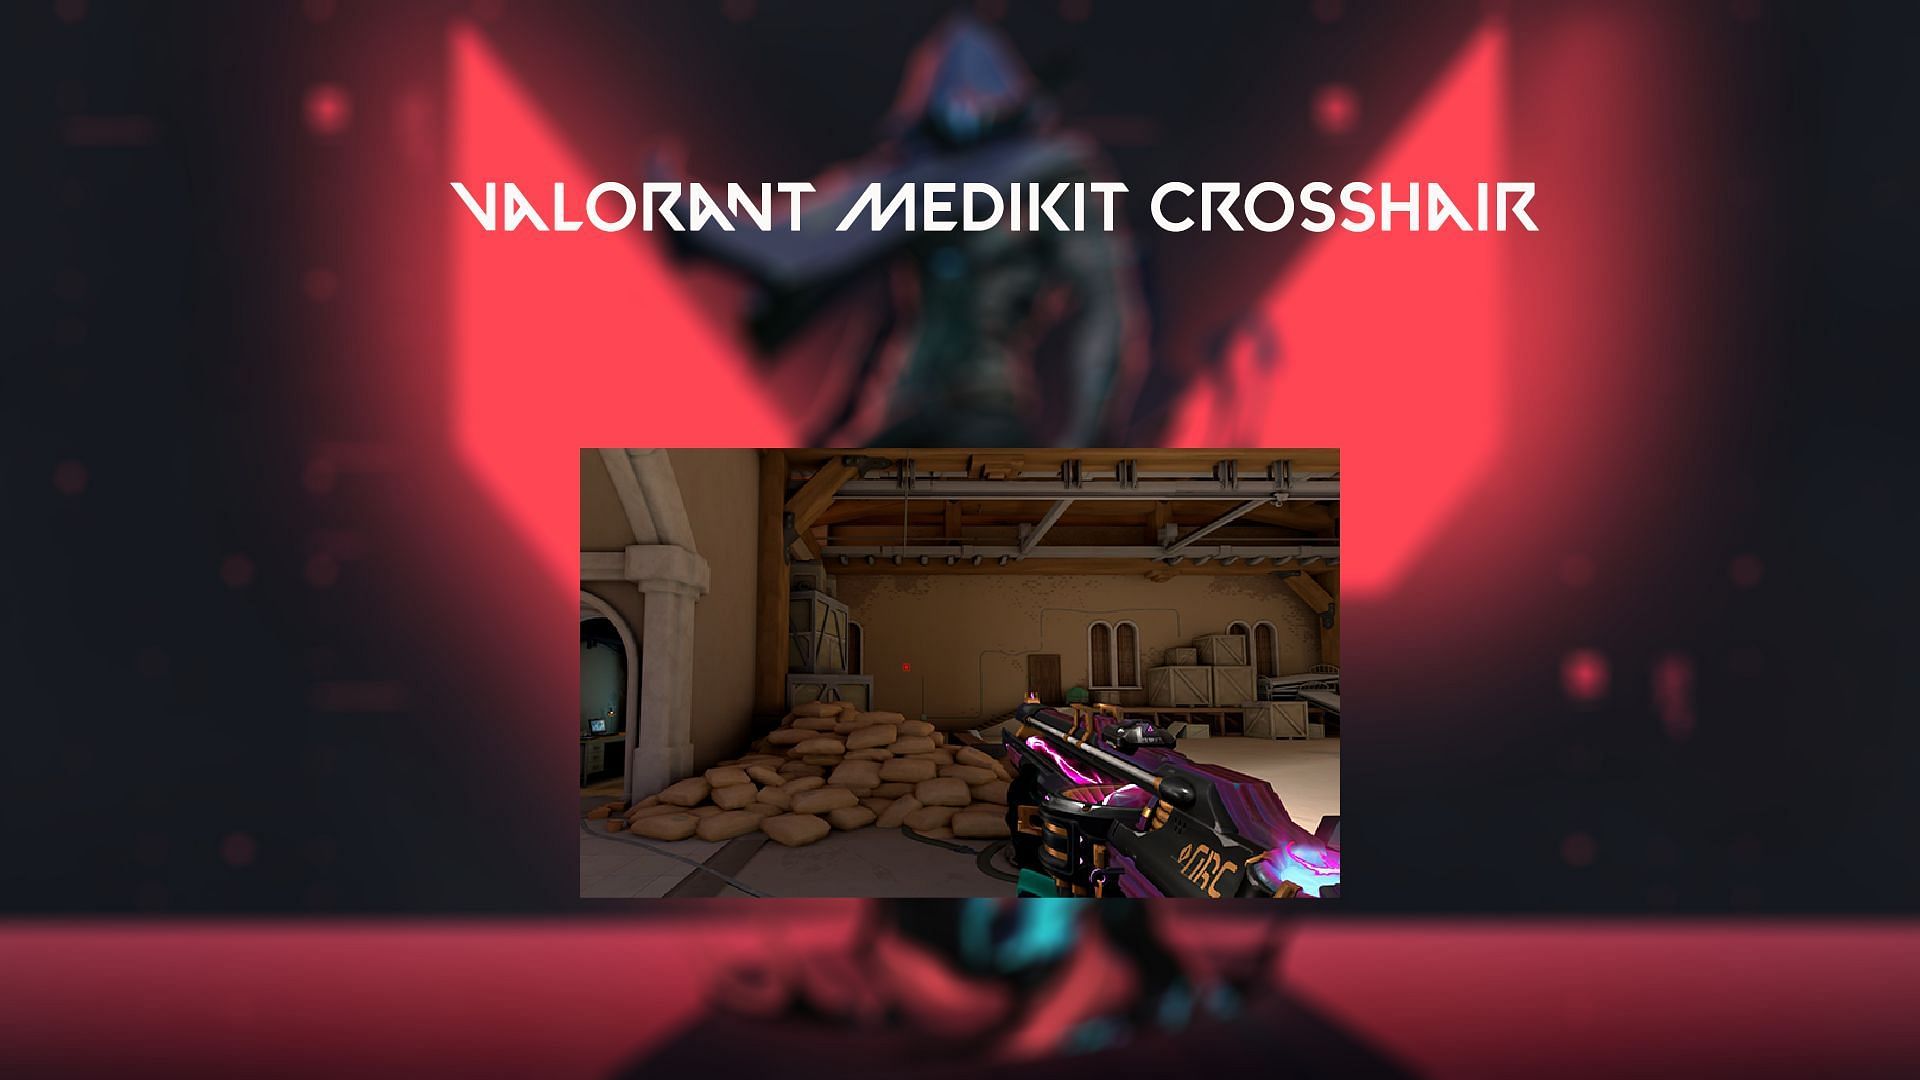 A guide to get the quirky medkit crosshair in Valorant (Image via Sportskeeda)